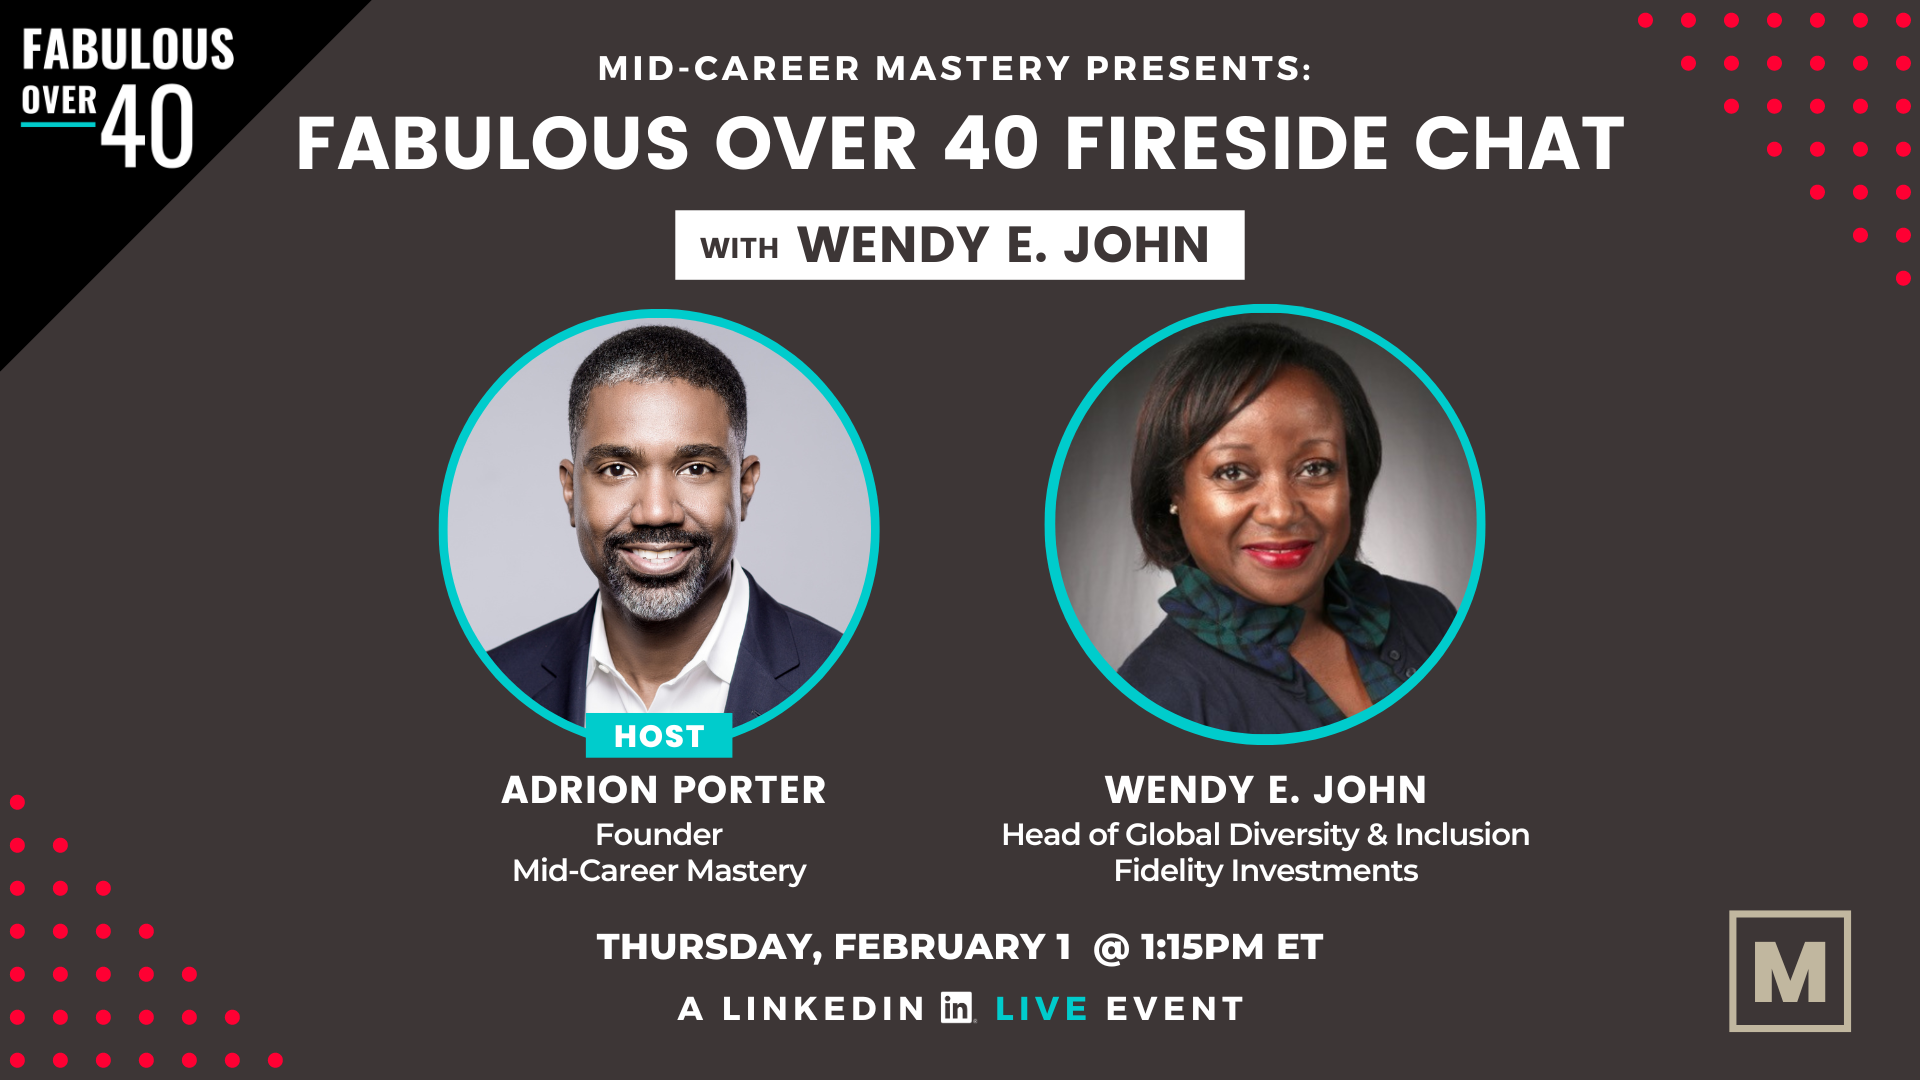 Fabulous Over 40 Fireside Chat with Wendy E. John, Head of Global D&I at Fidelity